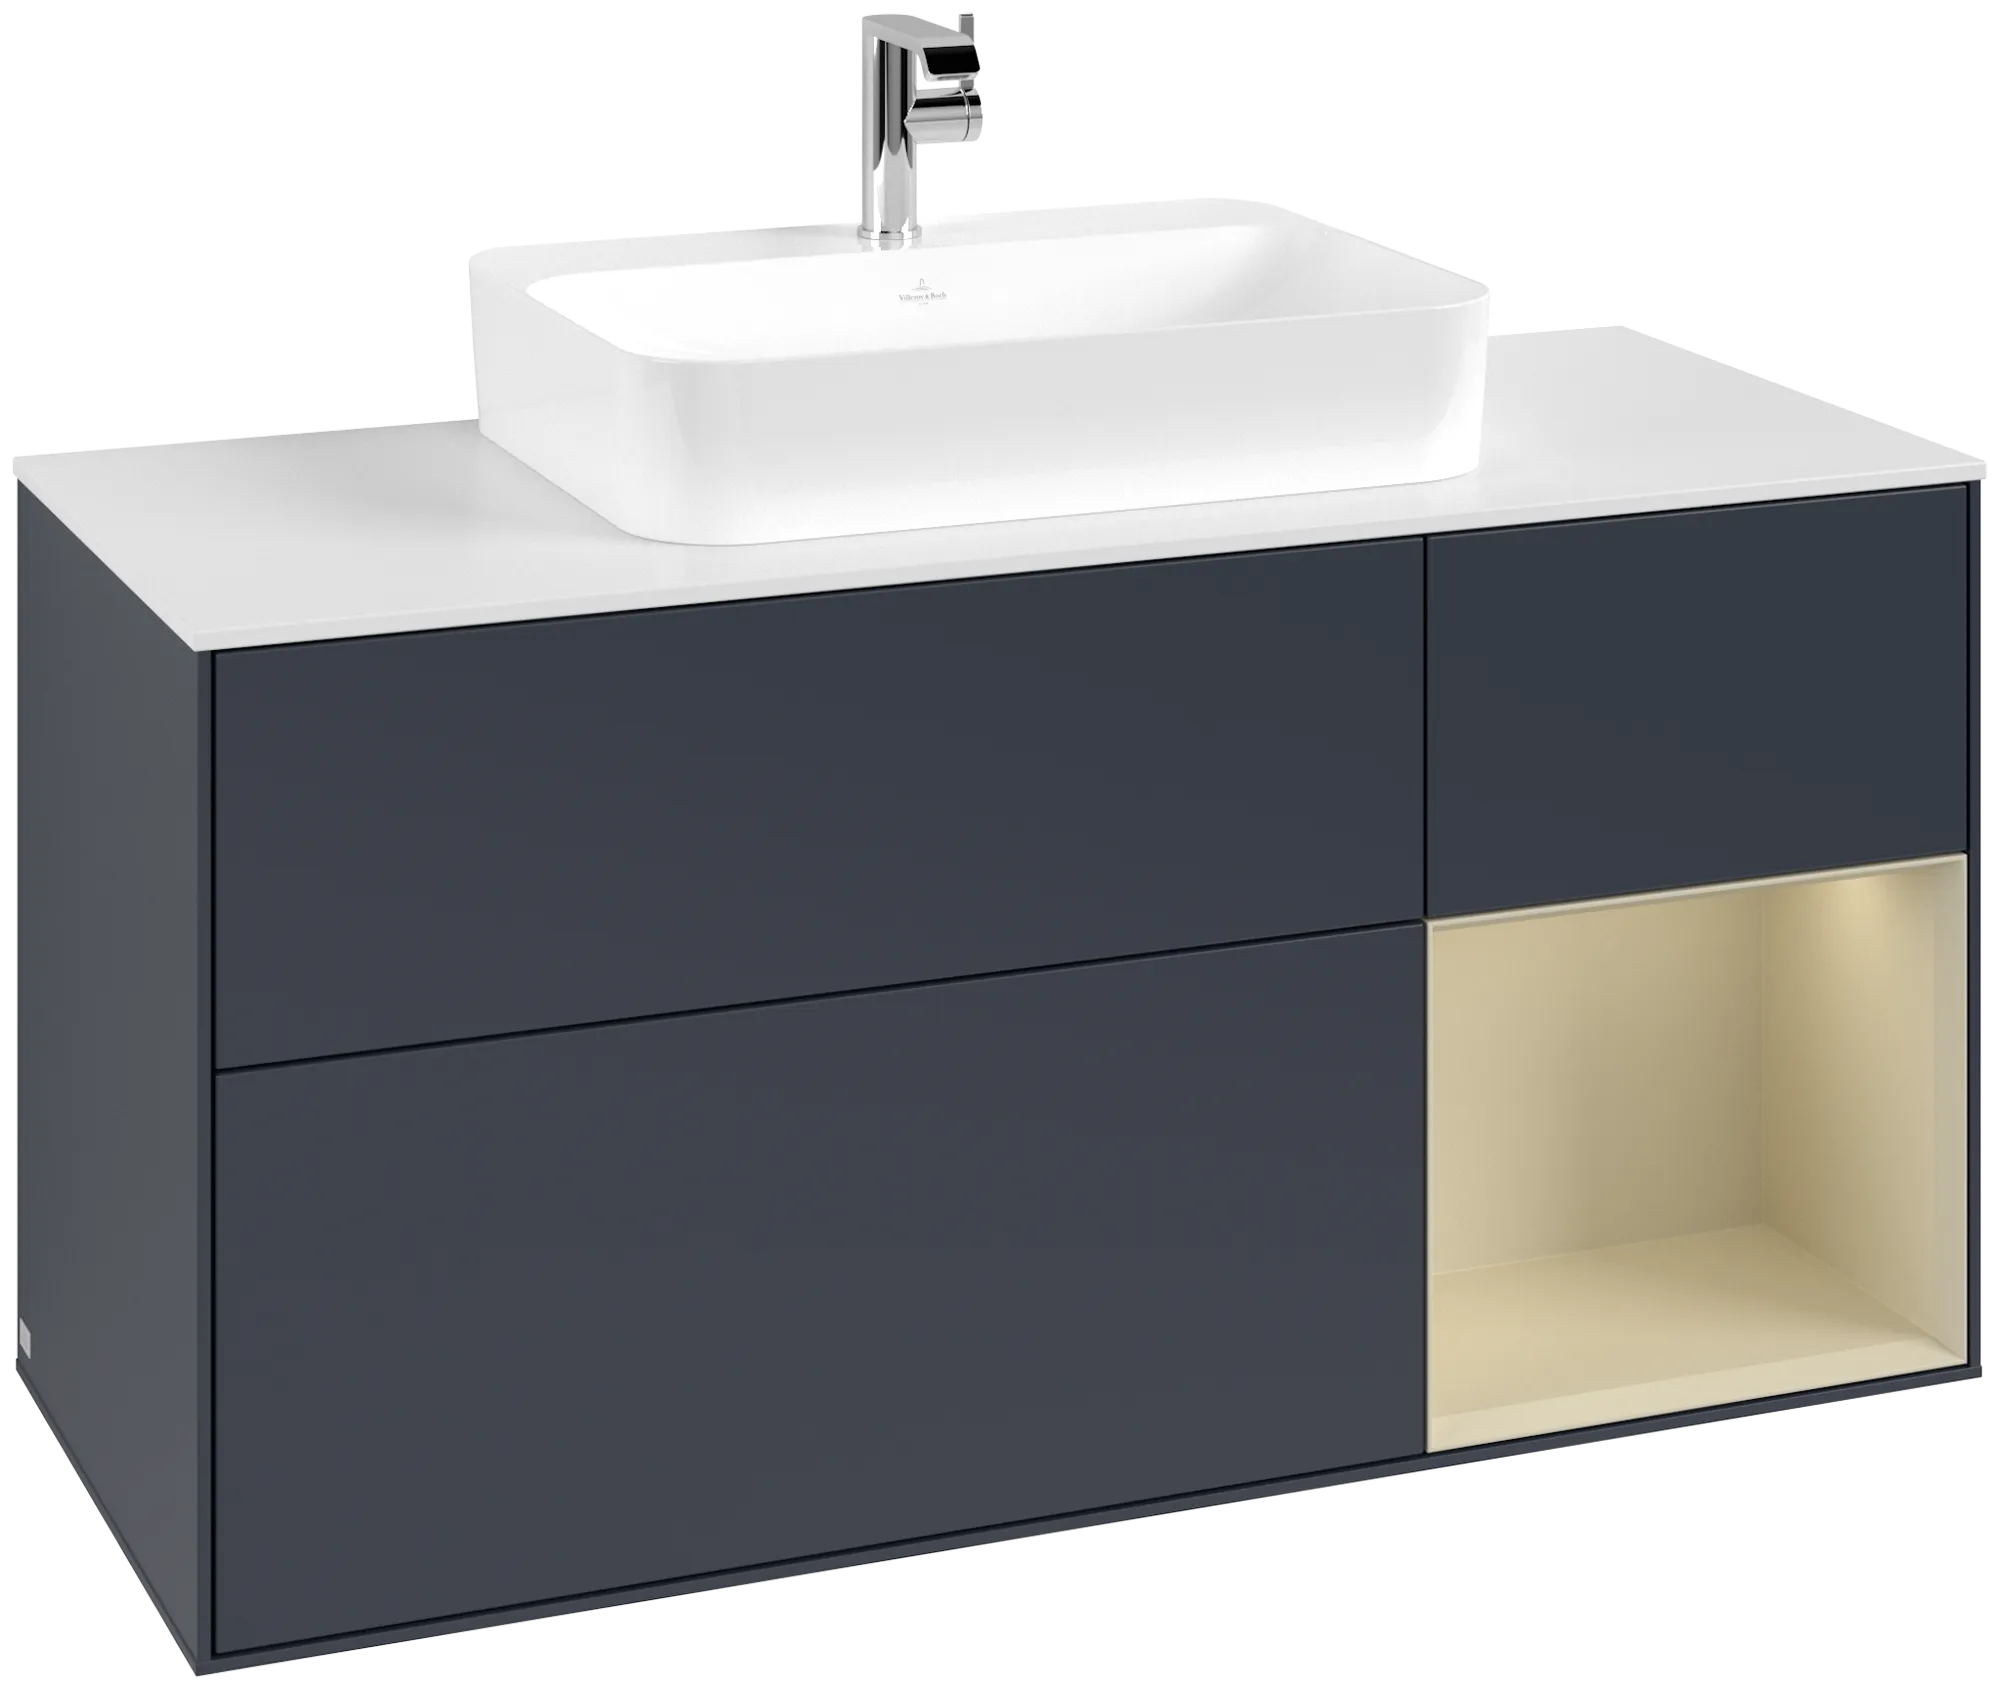 Picture of VILLEROY BOCH Finion Vanity unit, with lighting, 3 pull-out compartments, 1200 x 603 x 501 mm, Midnight Blue Matt Lacquer / Silk Grey Matt Lacquer / Glass White Matt #G421HJHG